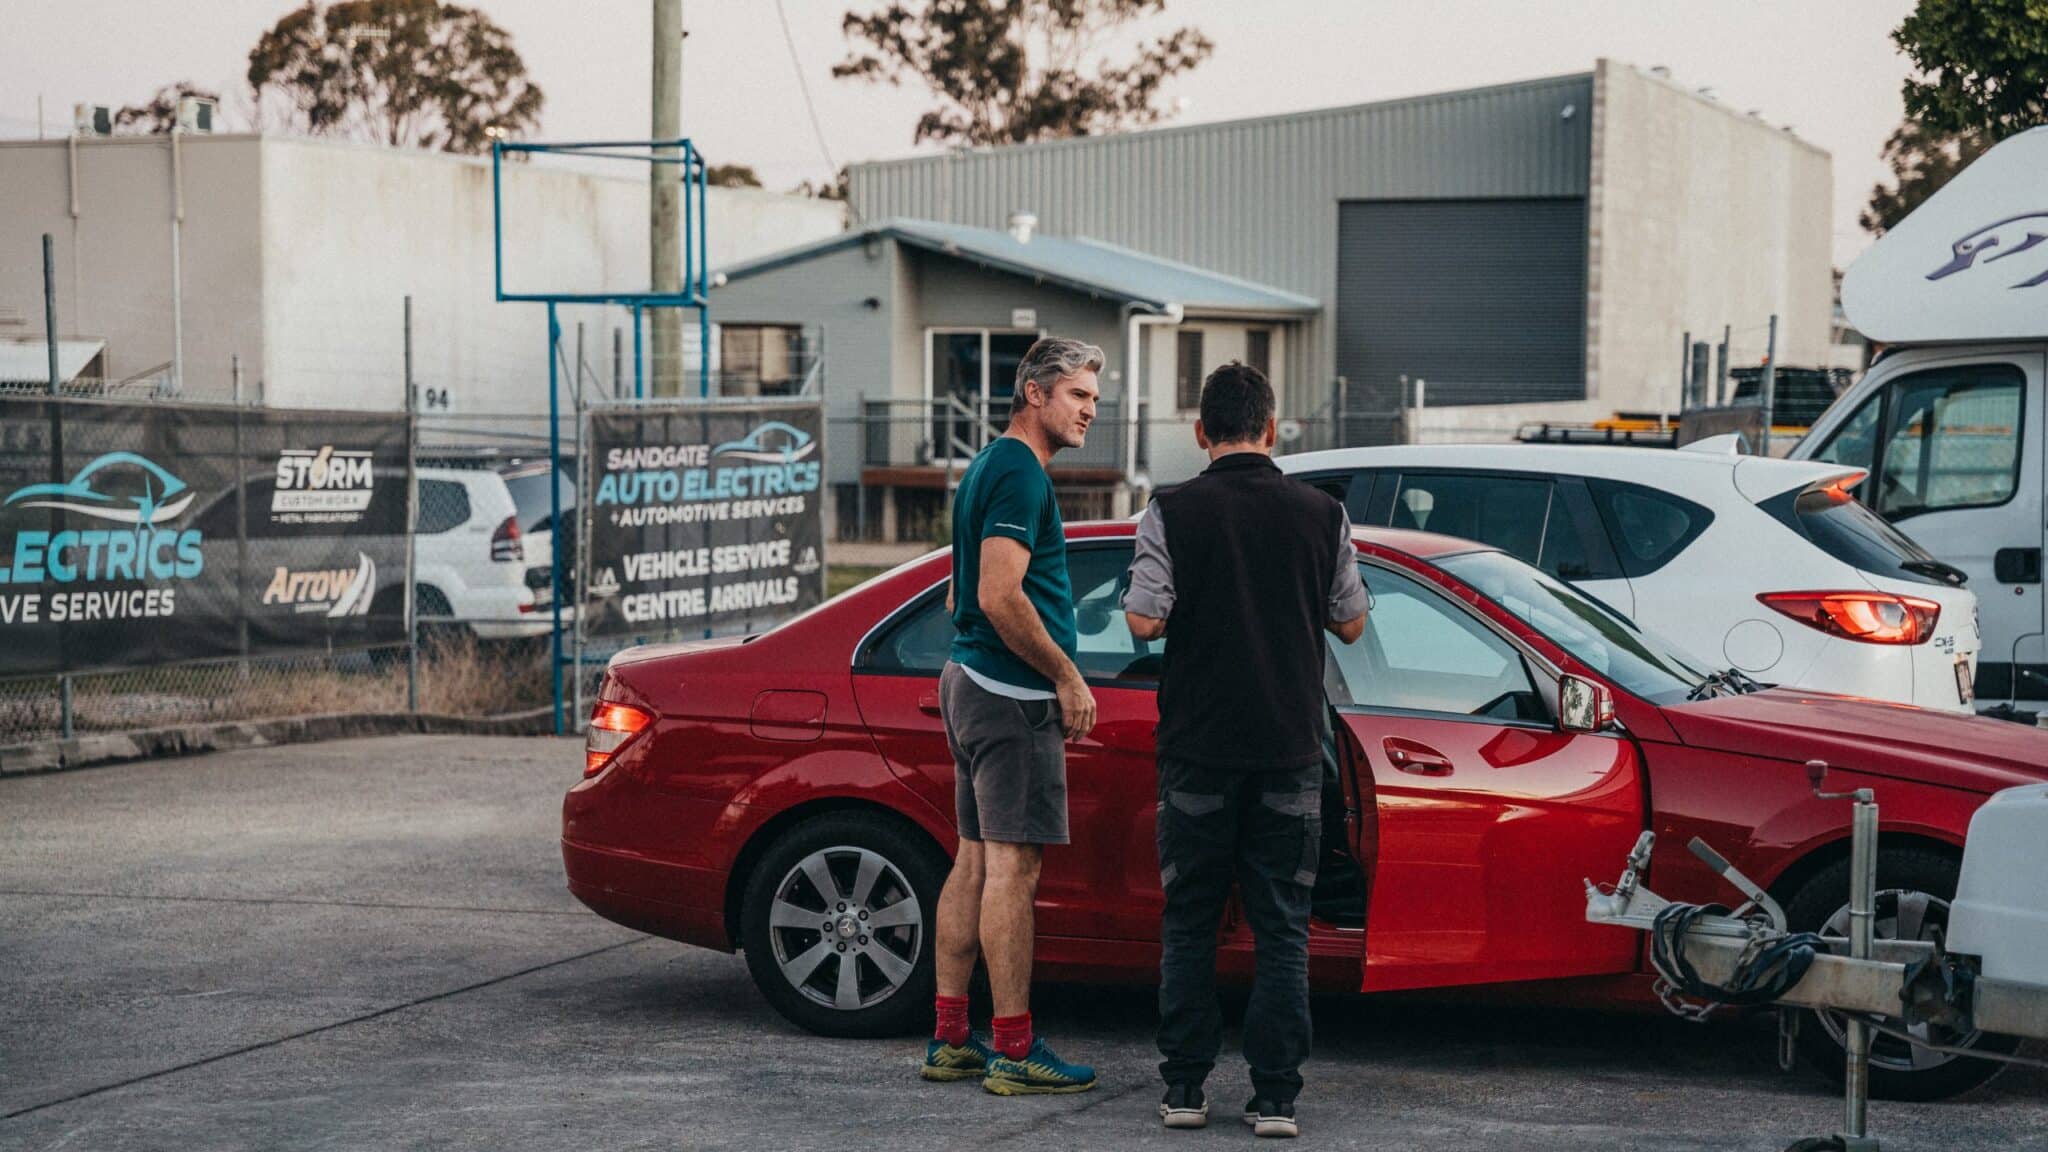 Two people discuss pre-purchase or safety checks in front of a red vehicle